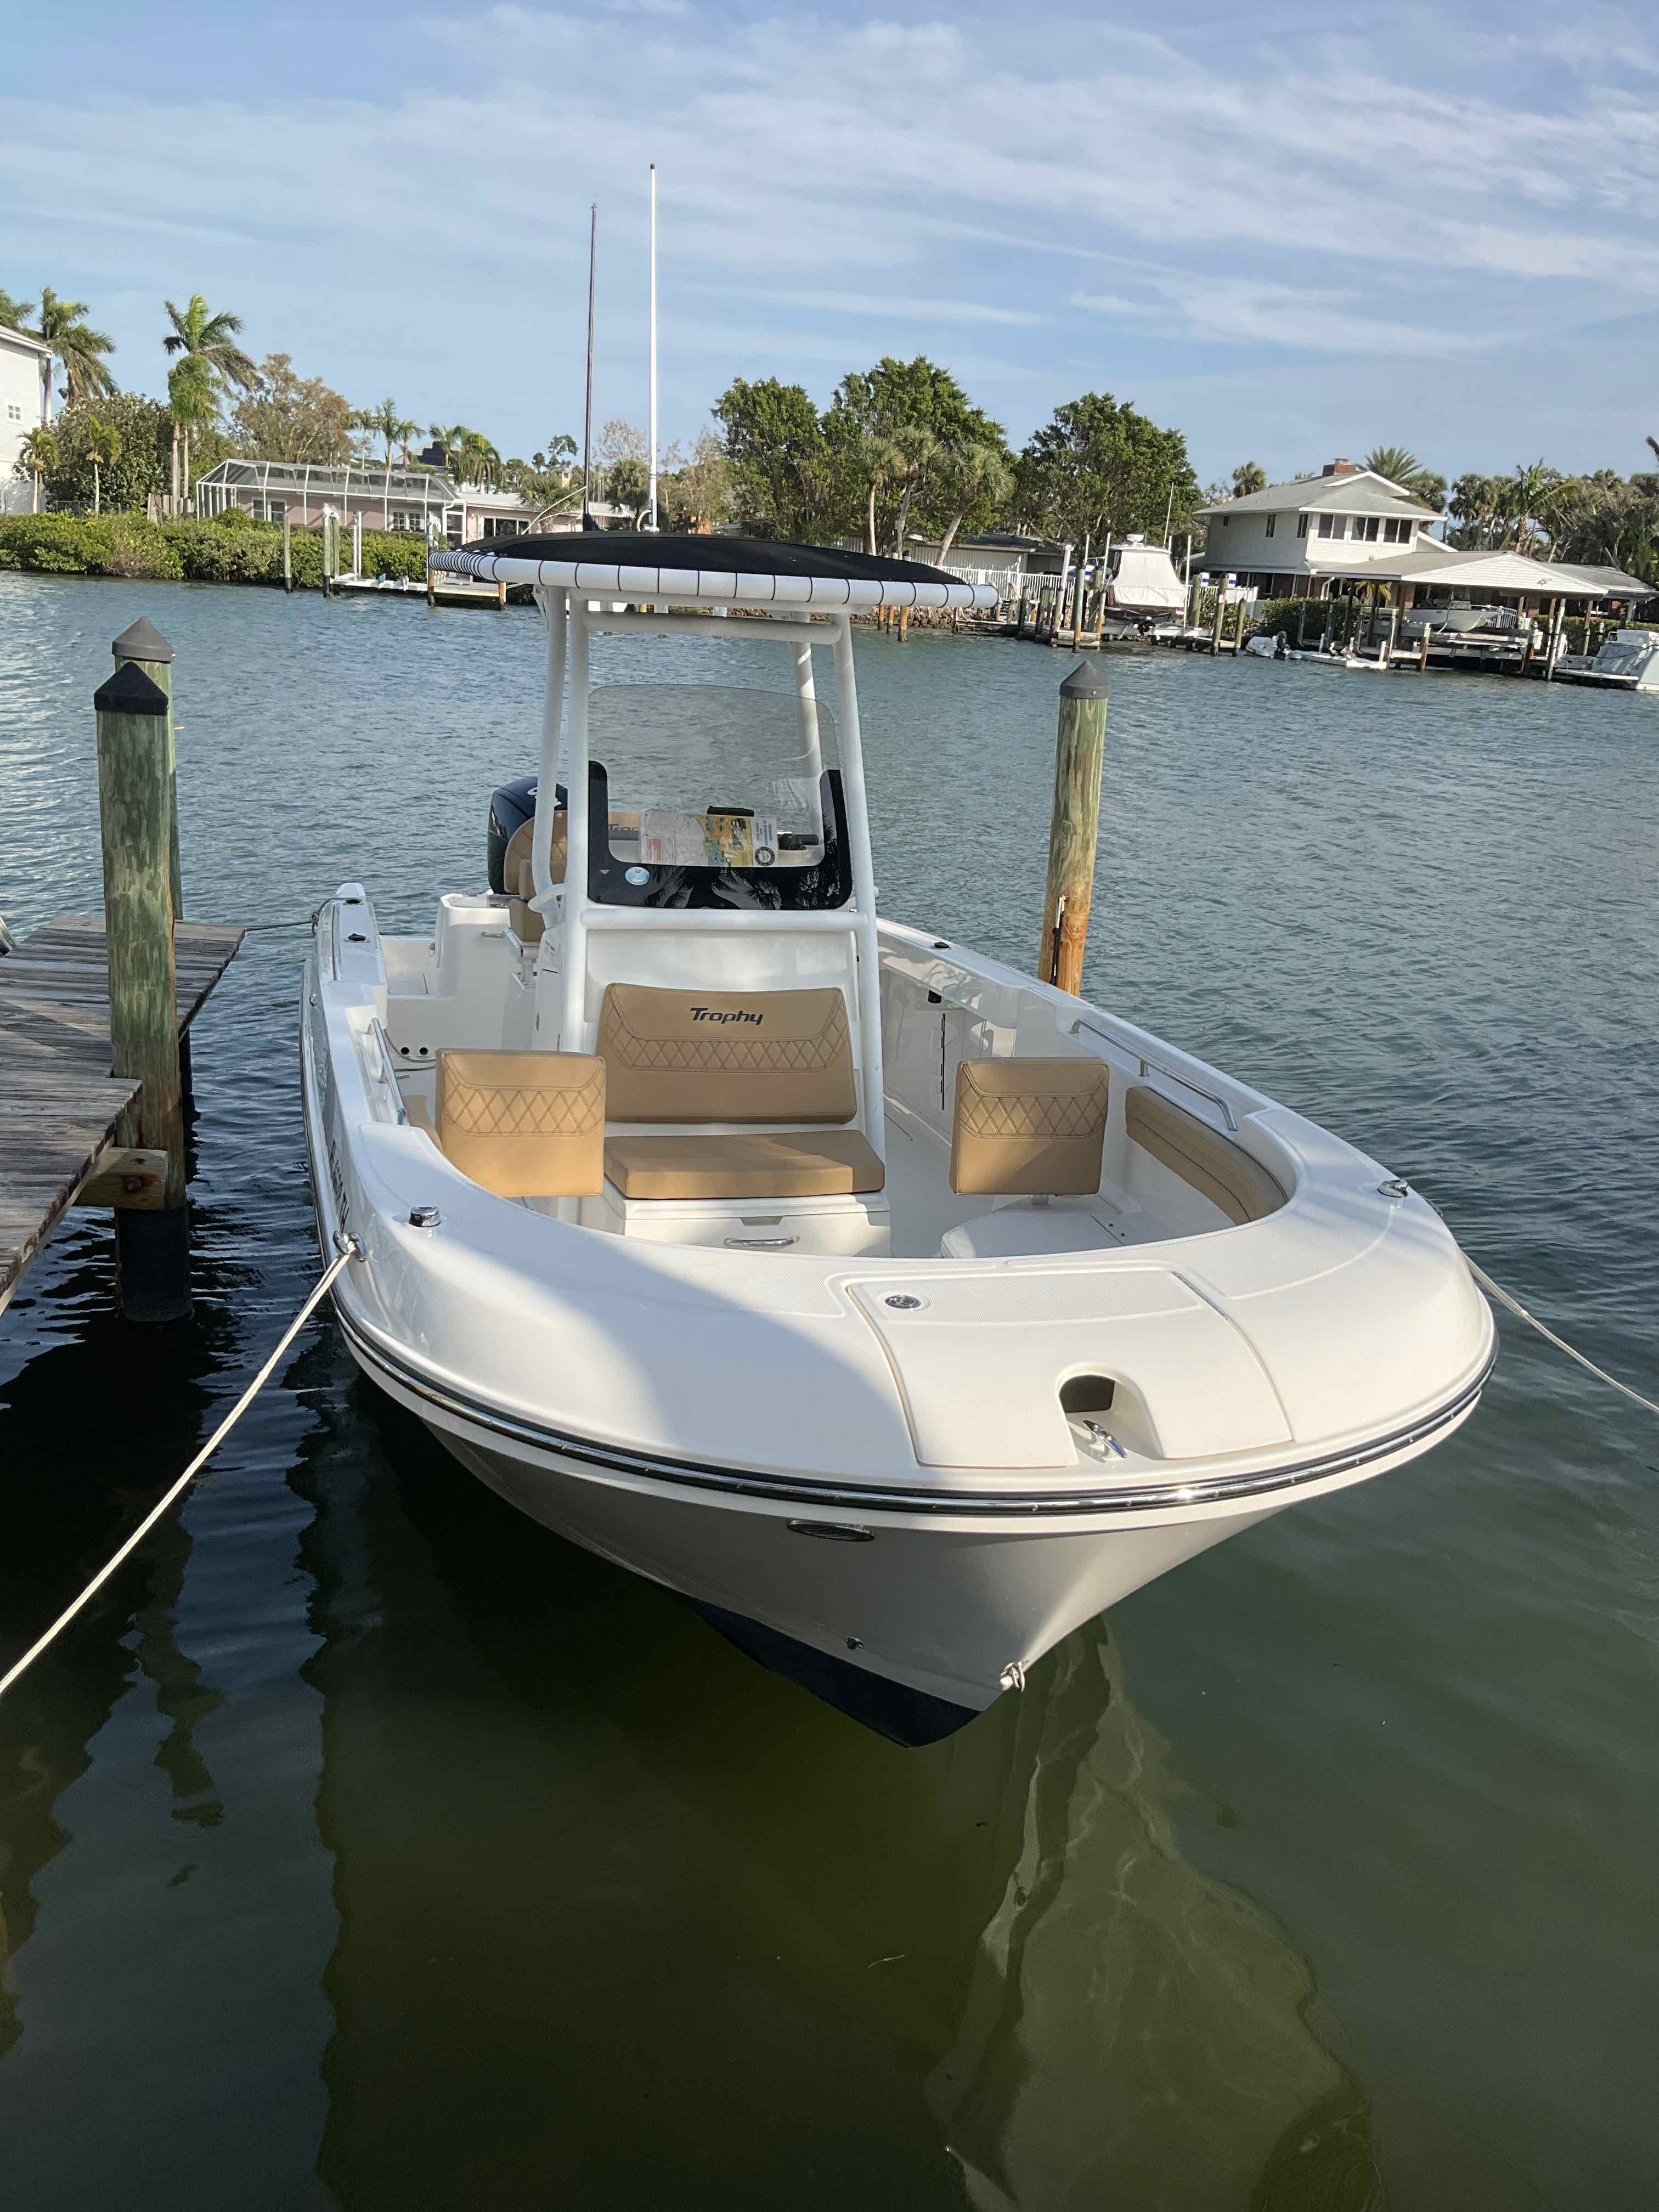 JUAN TIME BABY (22FT Bayliner Trophy Center Console - 200 HP~Fishing)